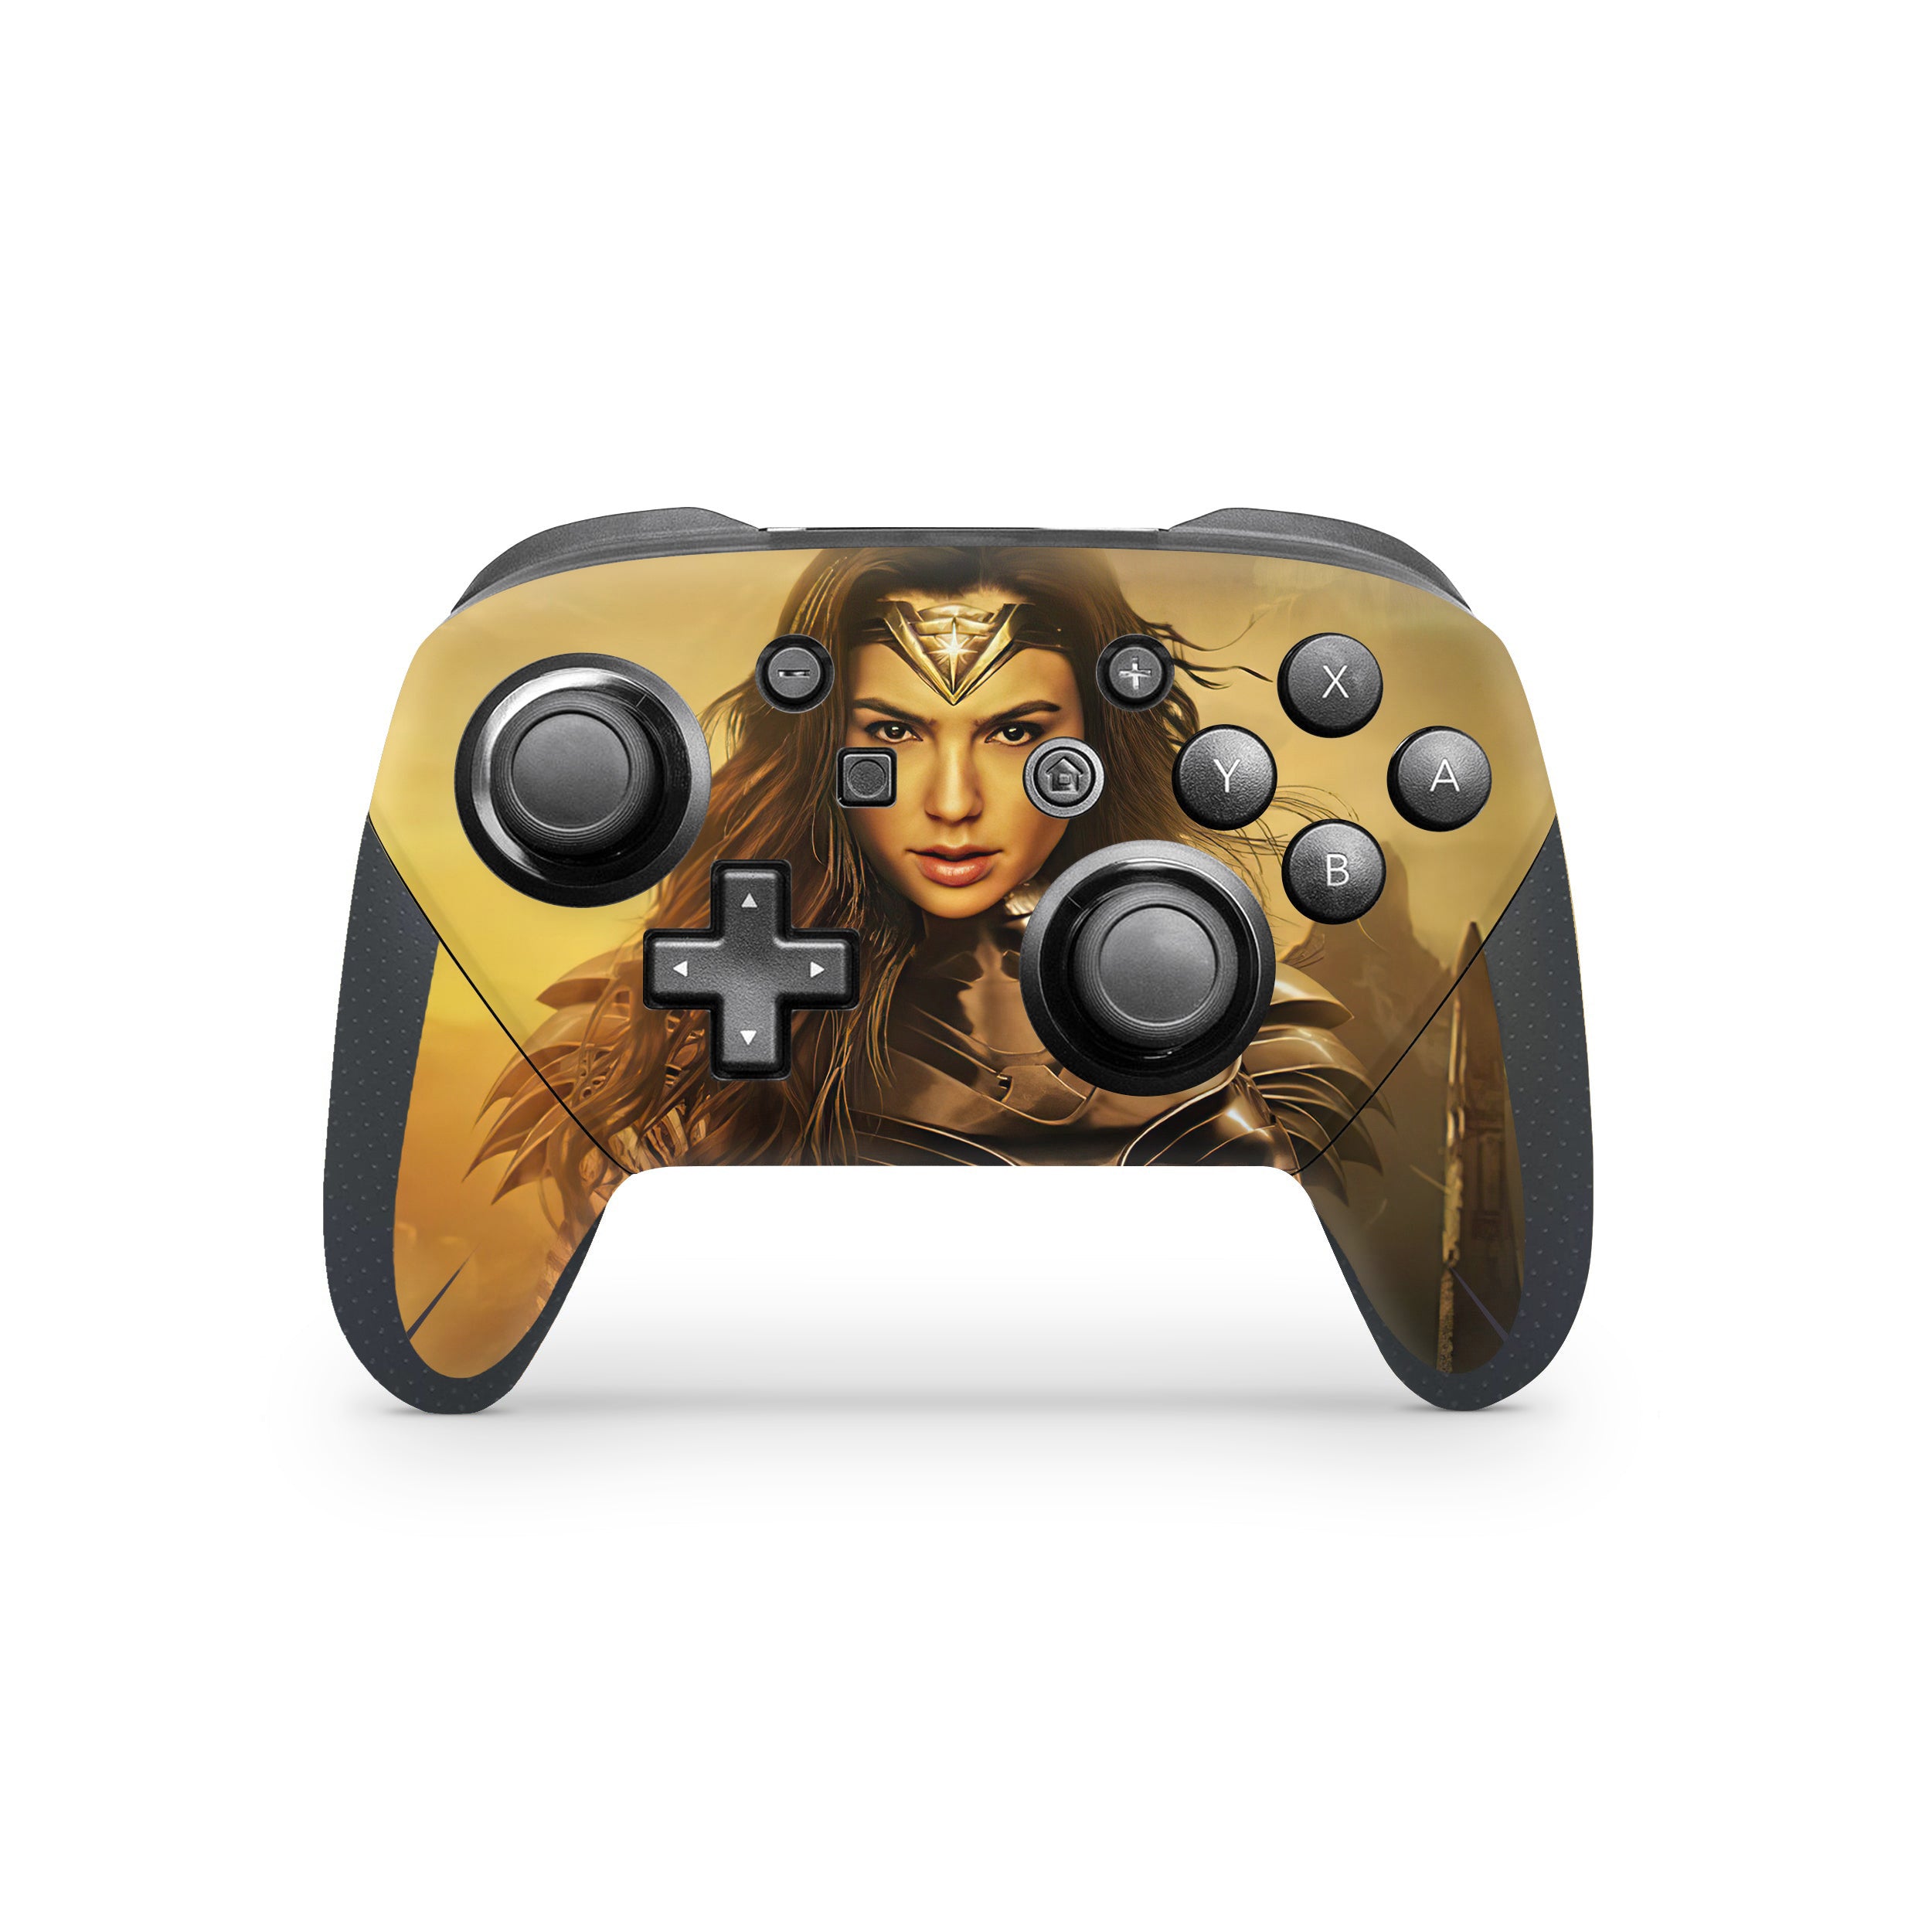 A video game skin featuring a DC Comics Wonder Woman design for the Switch Pro Controller.